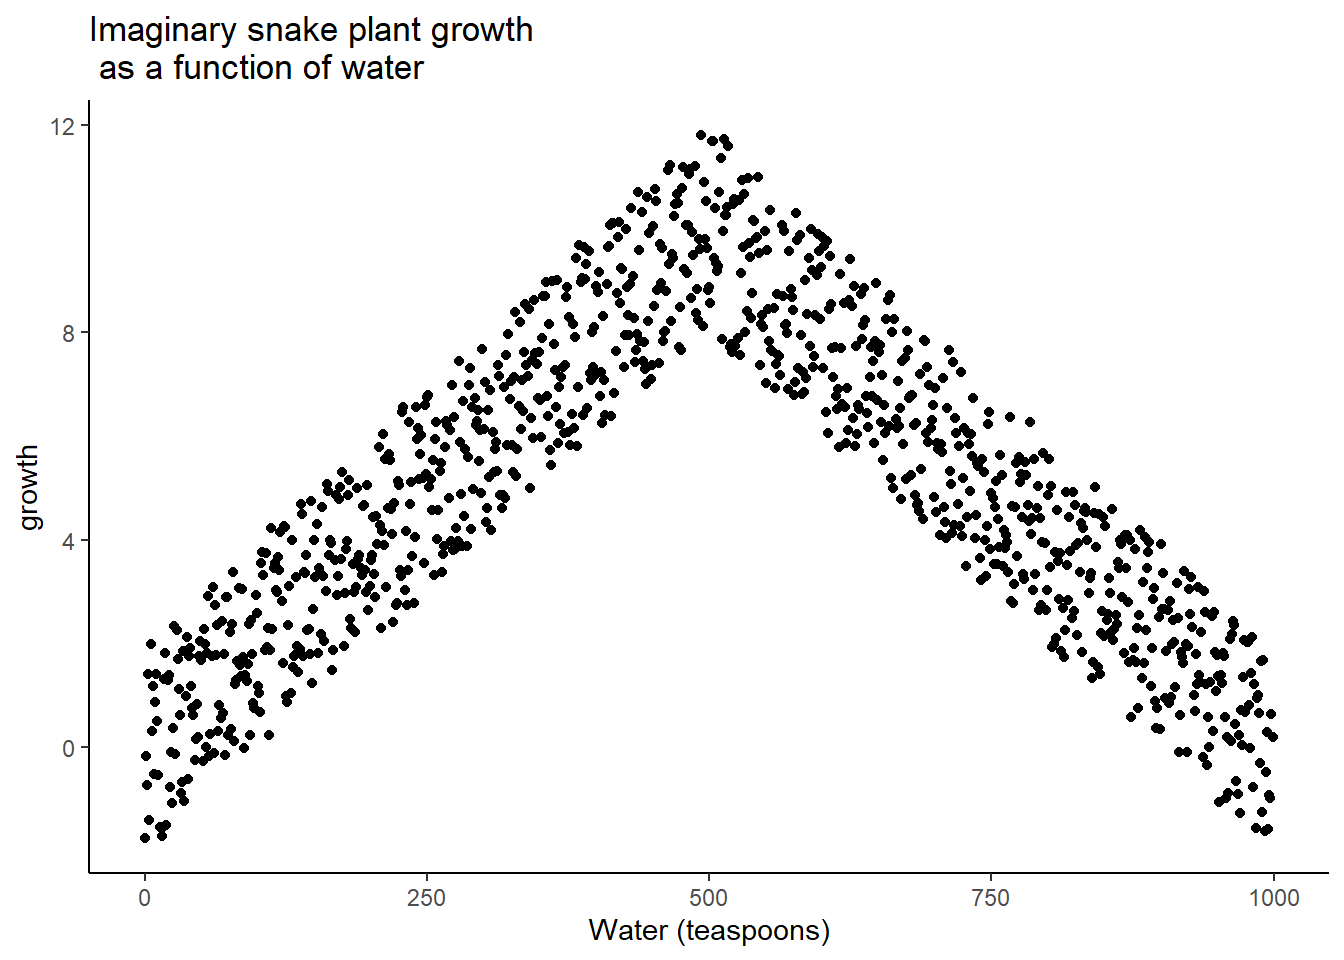 Illustration of a possible relationship between amount of water and snake plant growth. Growth goes up with water, but eventually goes back down as too much water makes snake plants die.